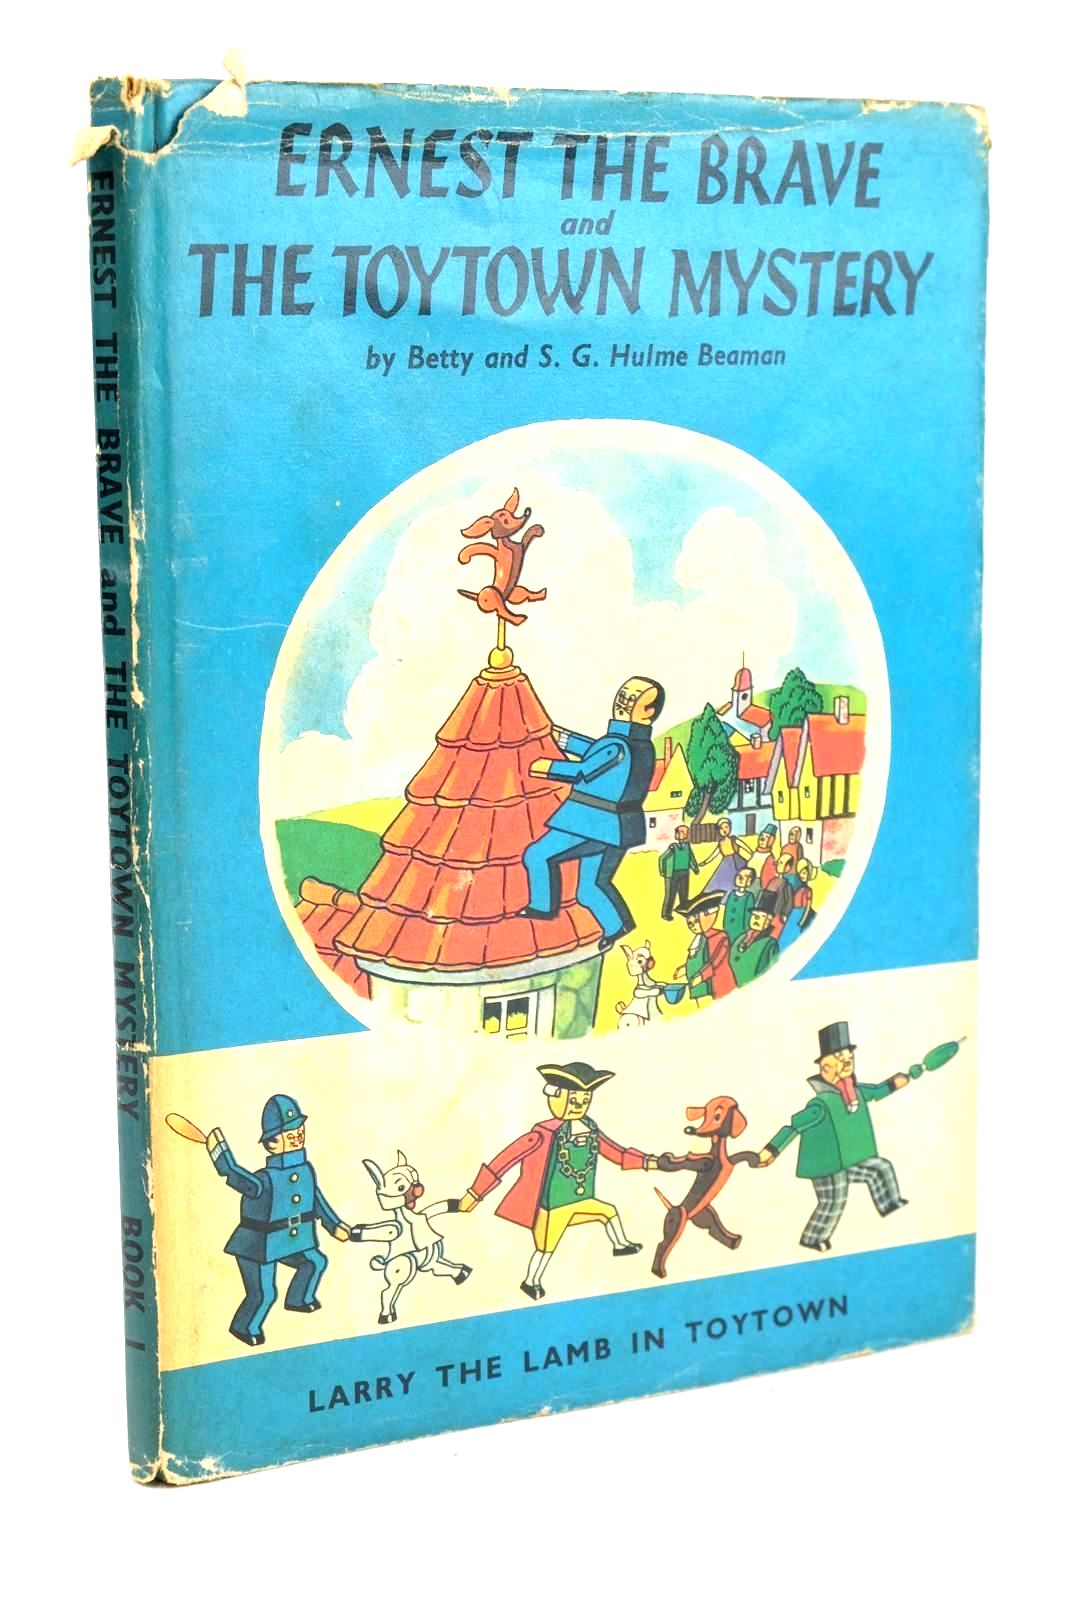 Photo of ERNEST THE BRAVE AND THE TOYTOWN MYSTERY written by Beaman, S.G. Hulme Hulme Beaman, Betty published by Oldbourne Press (STOCK CODE: 1325811)  for sale by Stella & Rose's Books